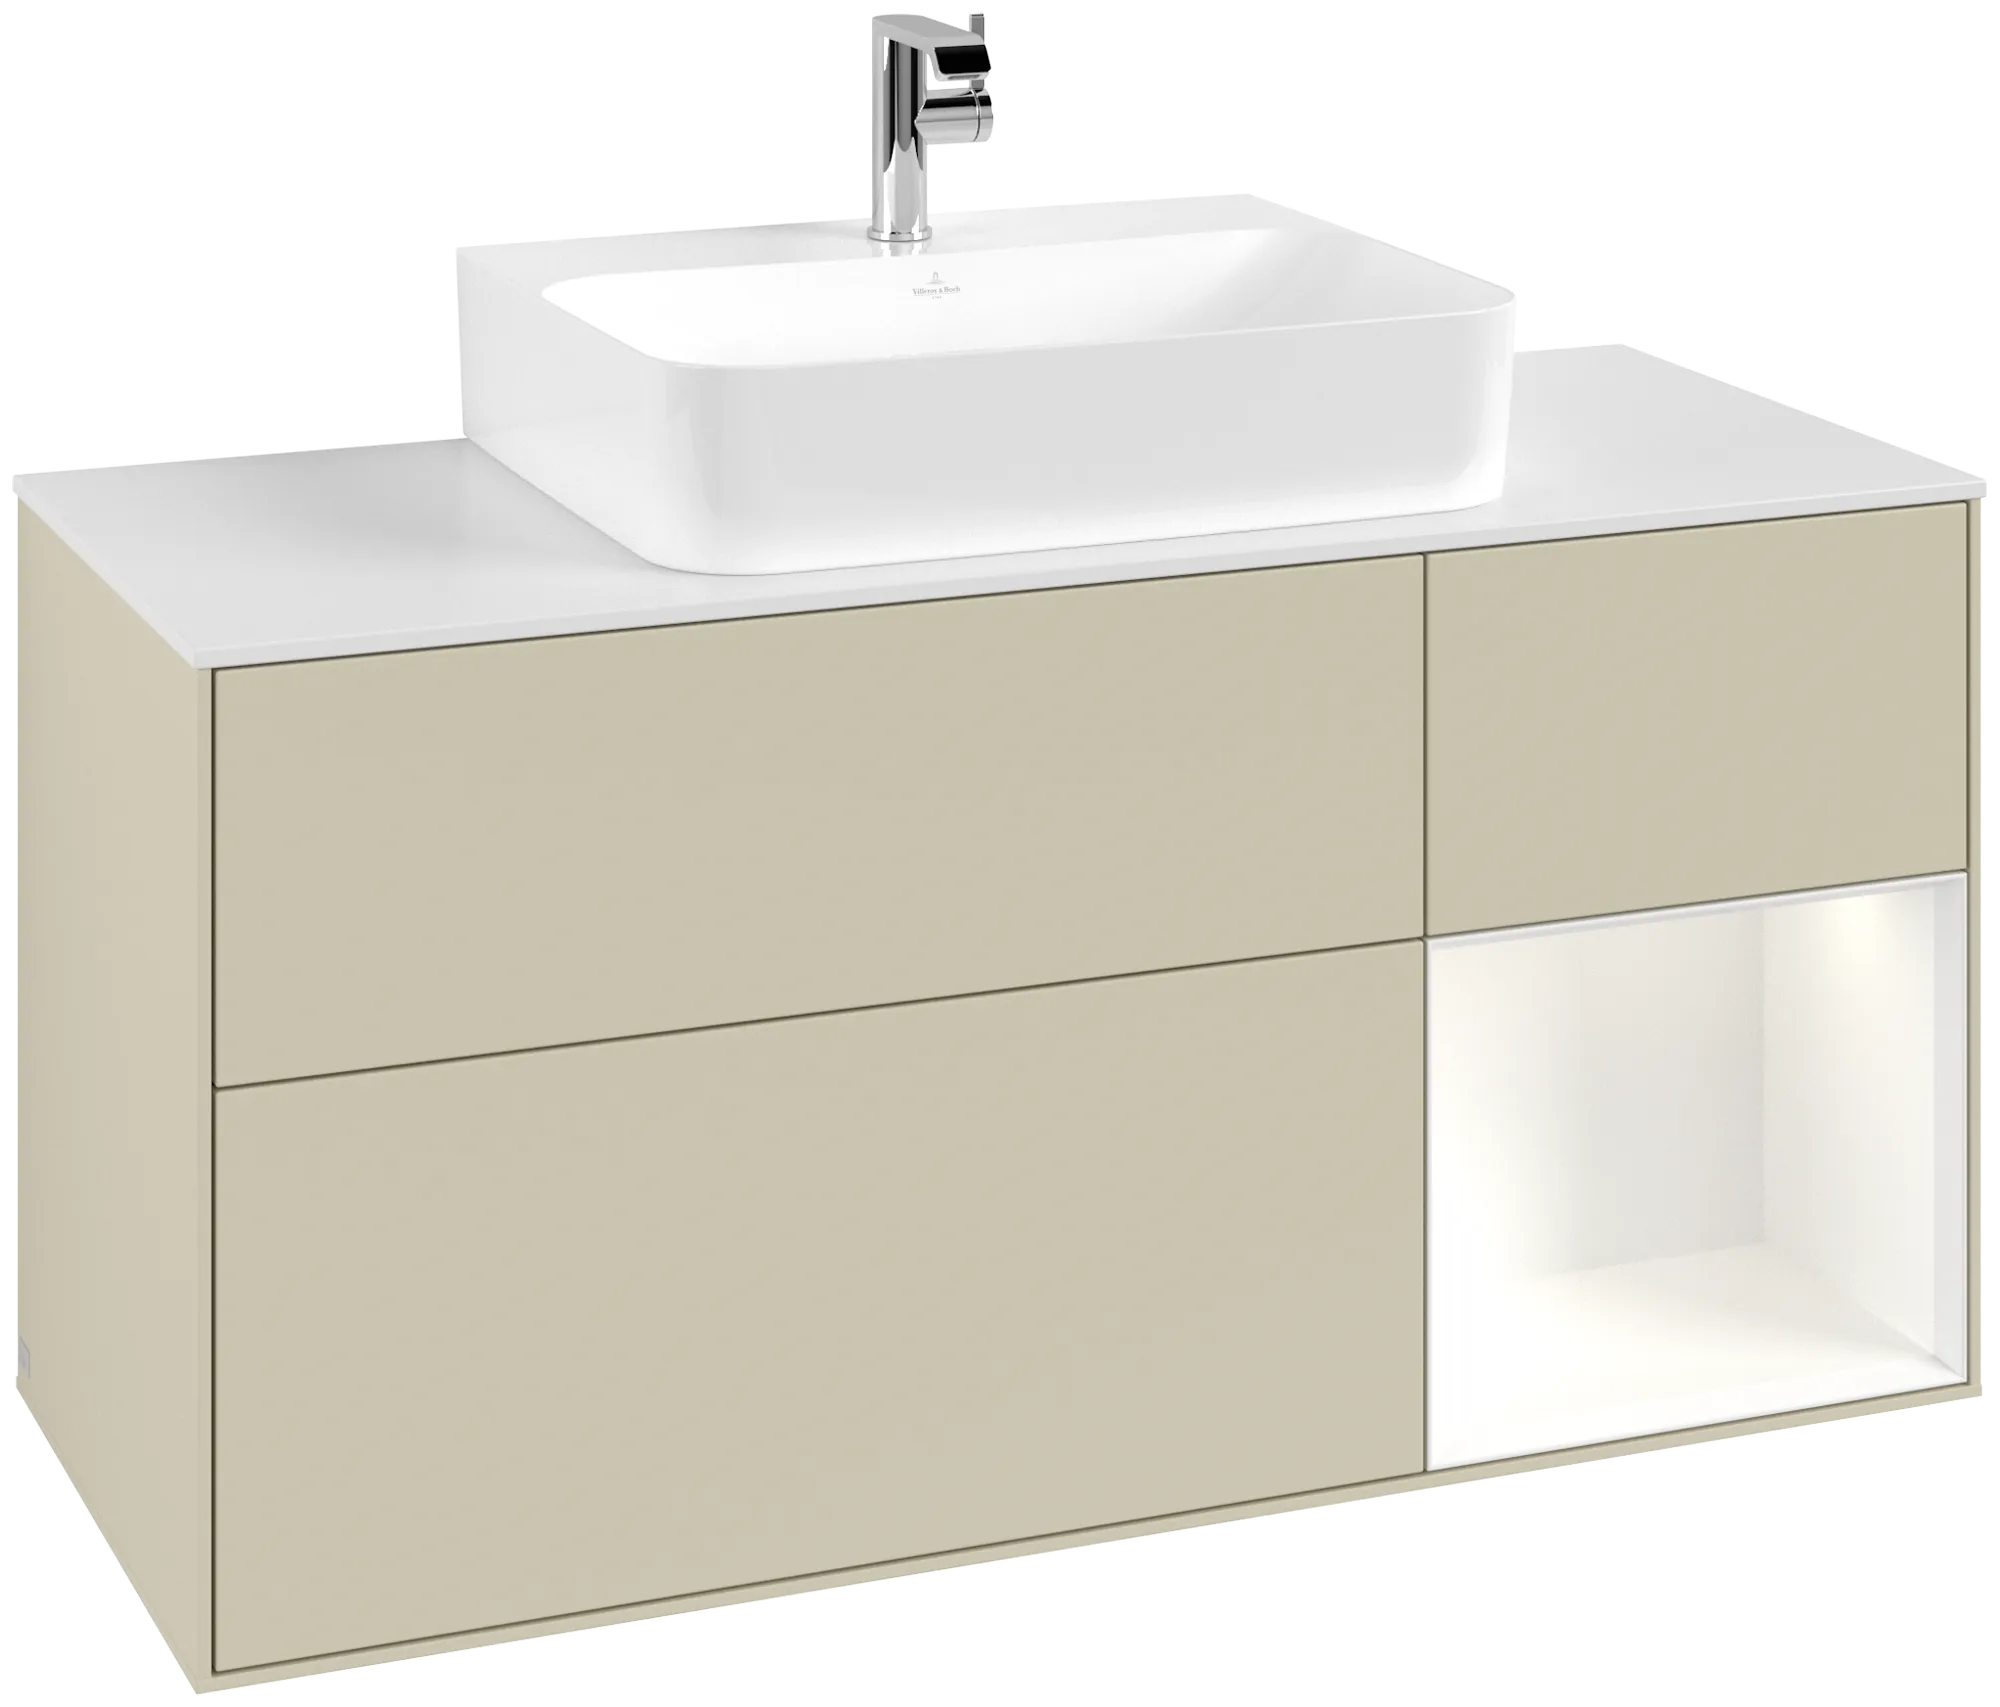 VILLEROY BOCH Finion Vanity unit, with lighting, 3 pull-out compartments, 1200 x 603 x 501 mm, Silk Grey Matt Lacquer / White Matt Lacquer / Glass White Matt #G171MTHJ resmi